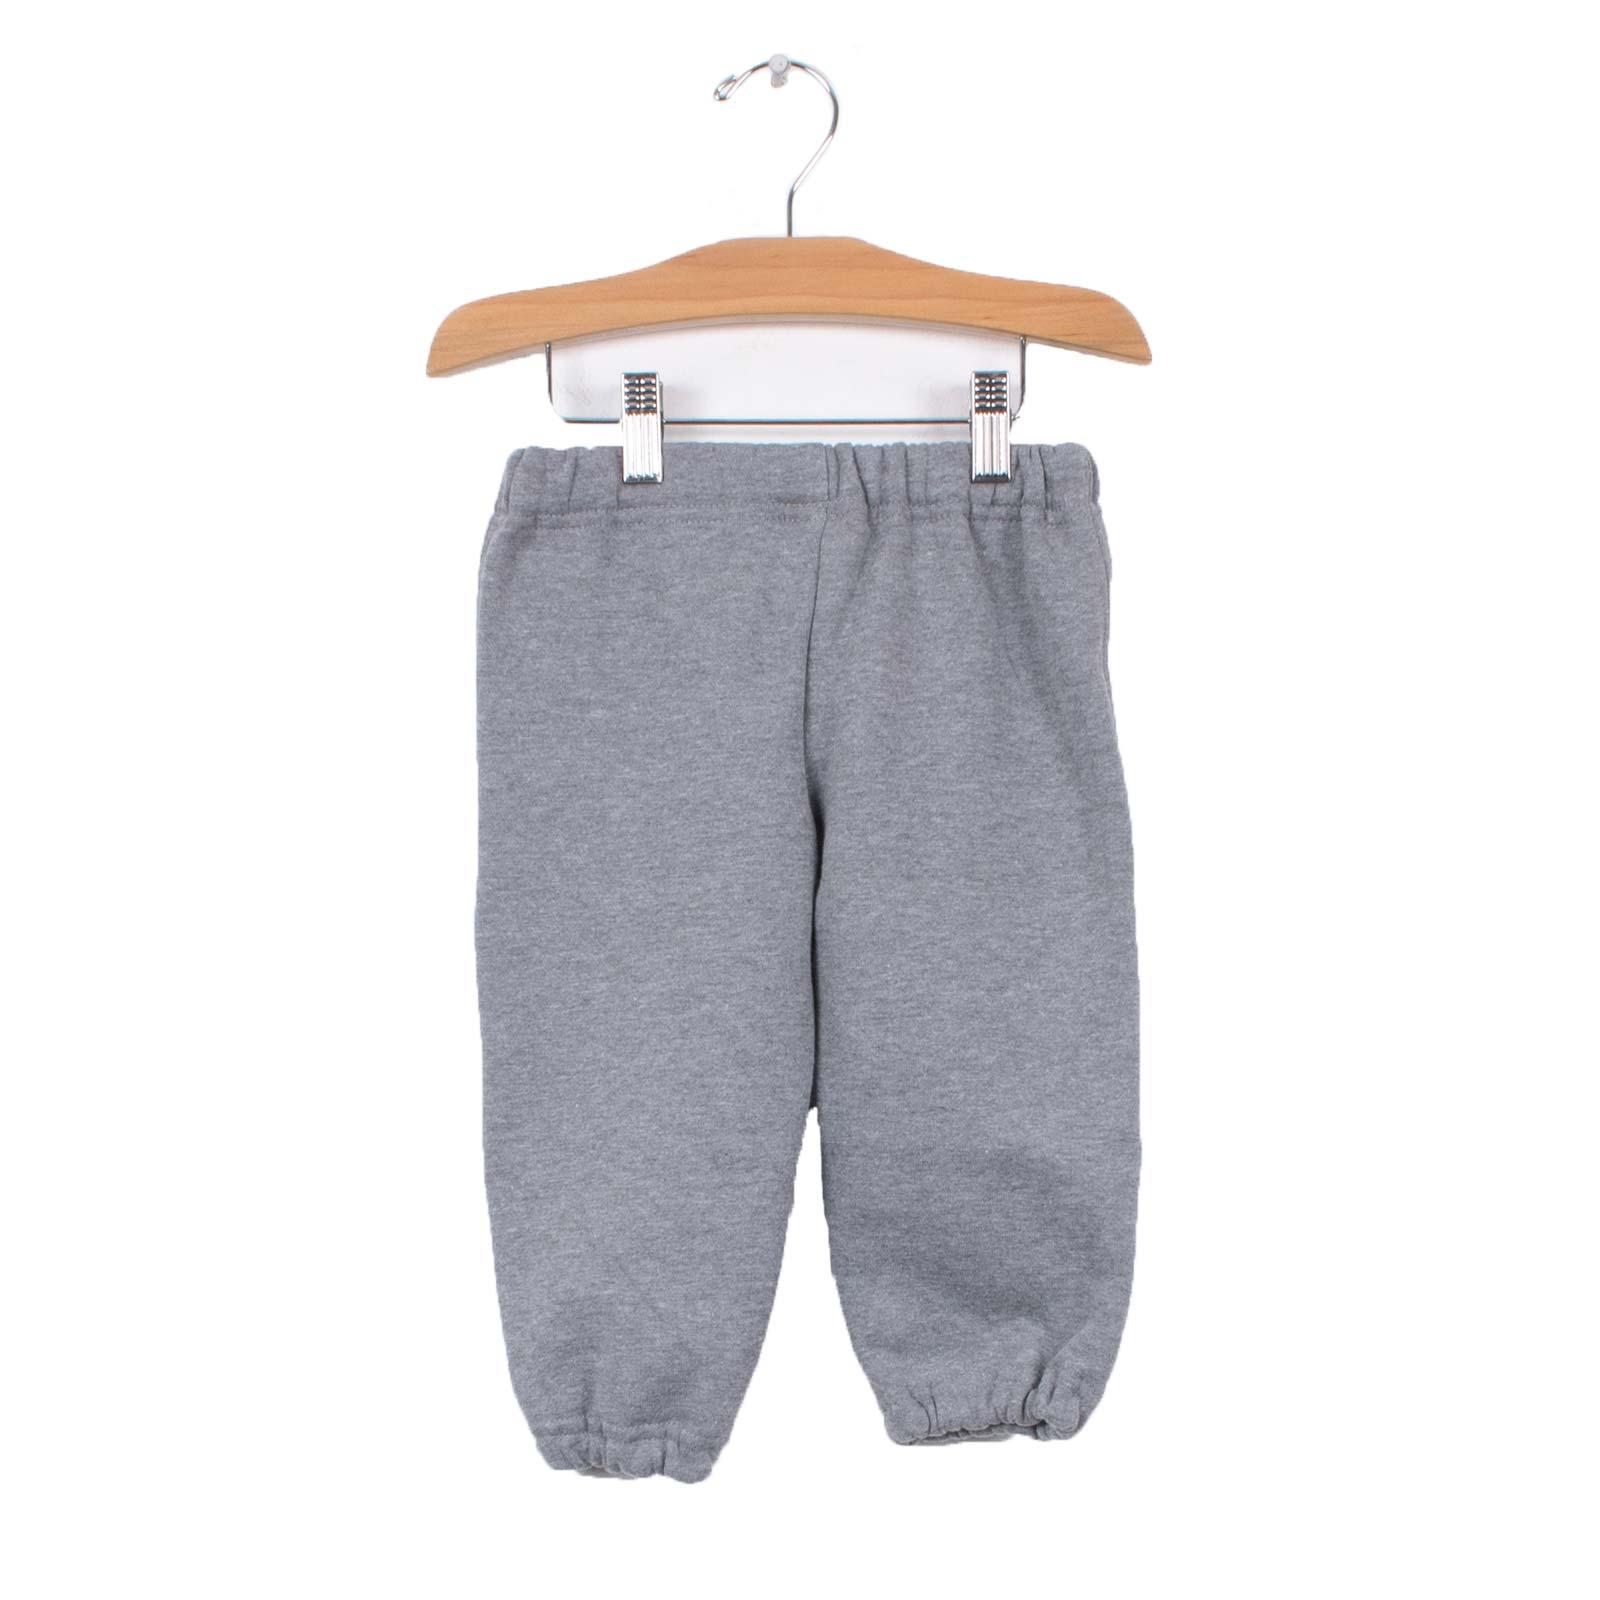 USC Arch Toddler TT Pant Oxford image81